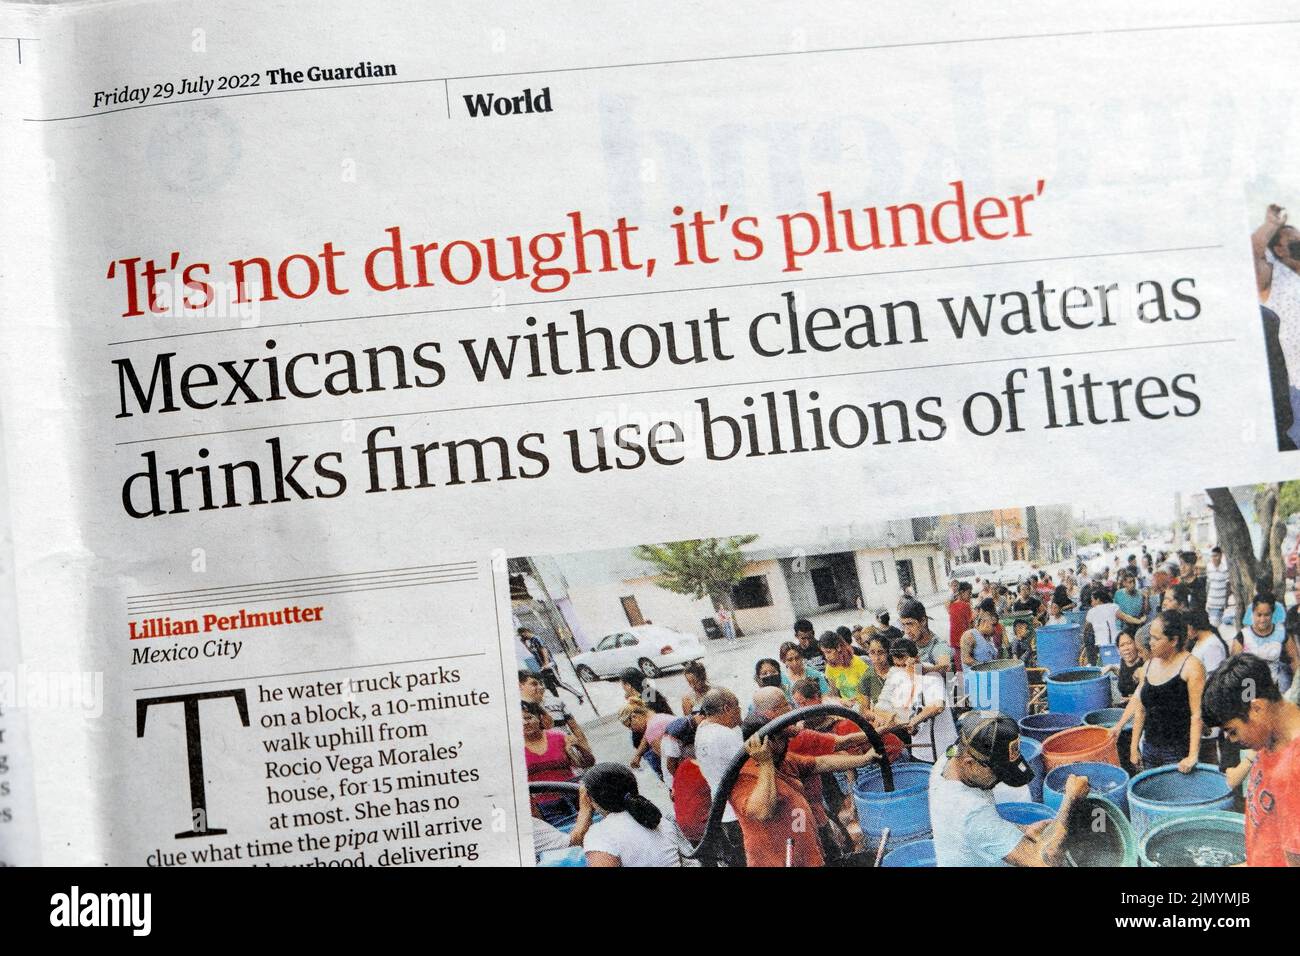 'It's not drought, it's plunder' Mexicans without clean water as drinks firms use billions of litres' Guardian Mexico newspaper headline 29 July 2022 Stock Photo